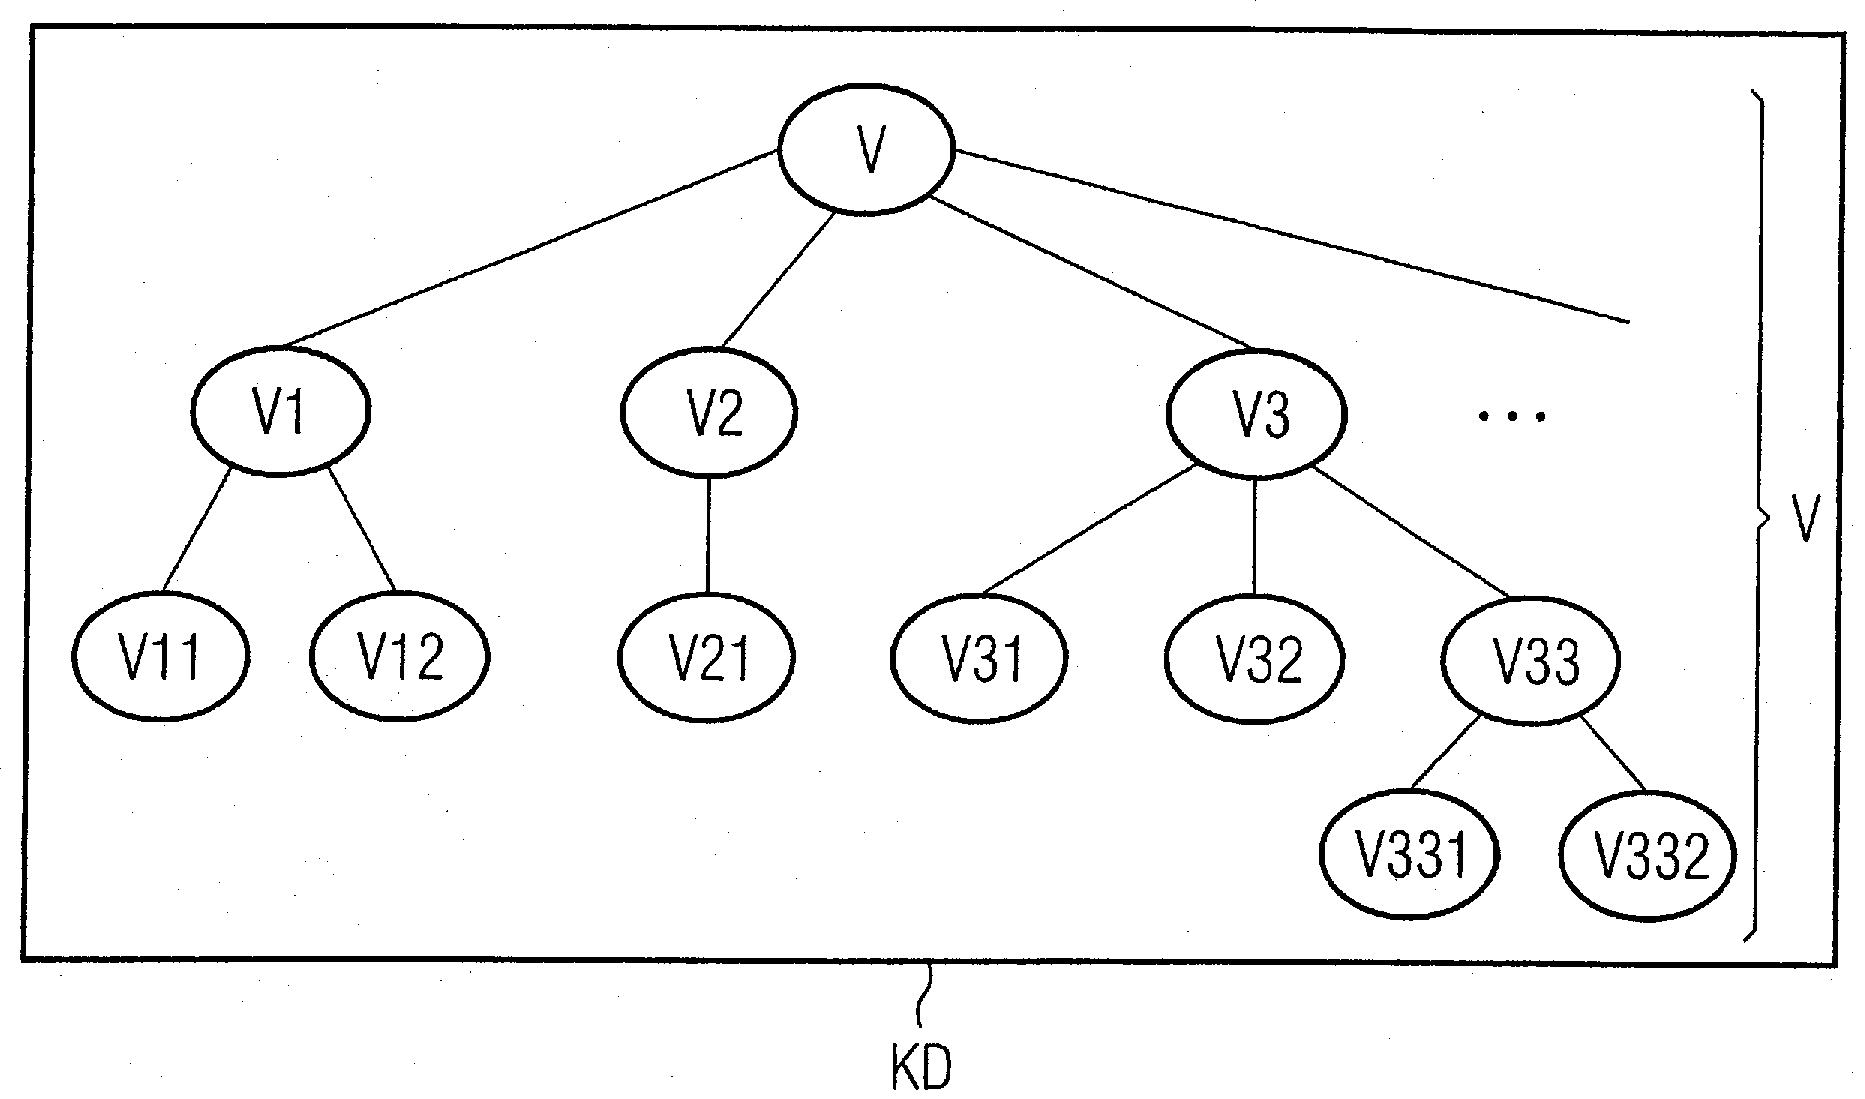 Administration of differently-versioned configuration files of a medical facility